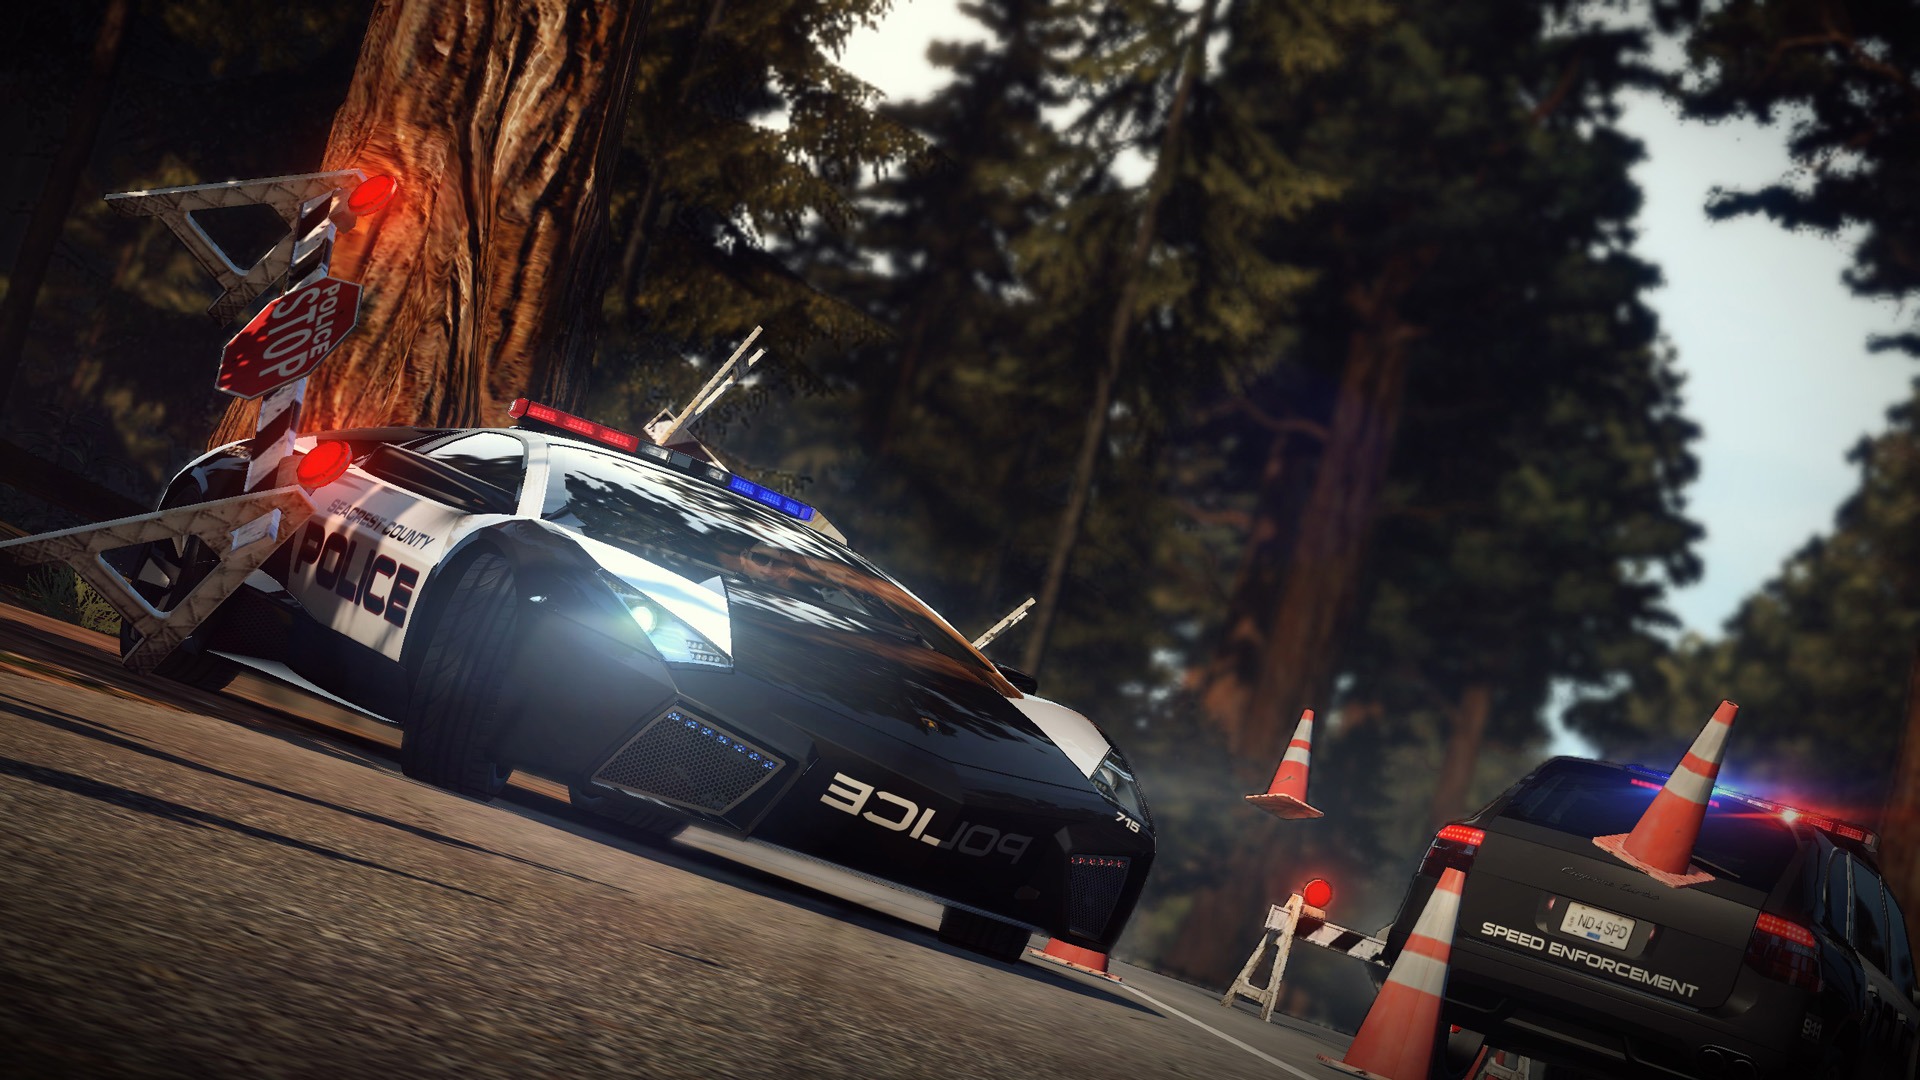 Need for Speed: Hot Pursuit 极品飞车14：热力追踪7 - 1920x1080